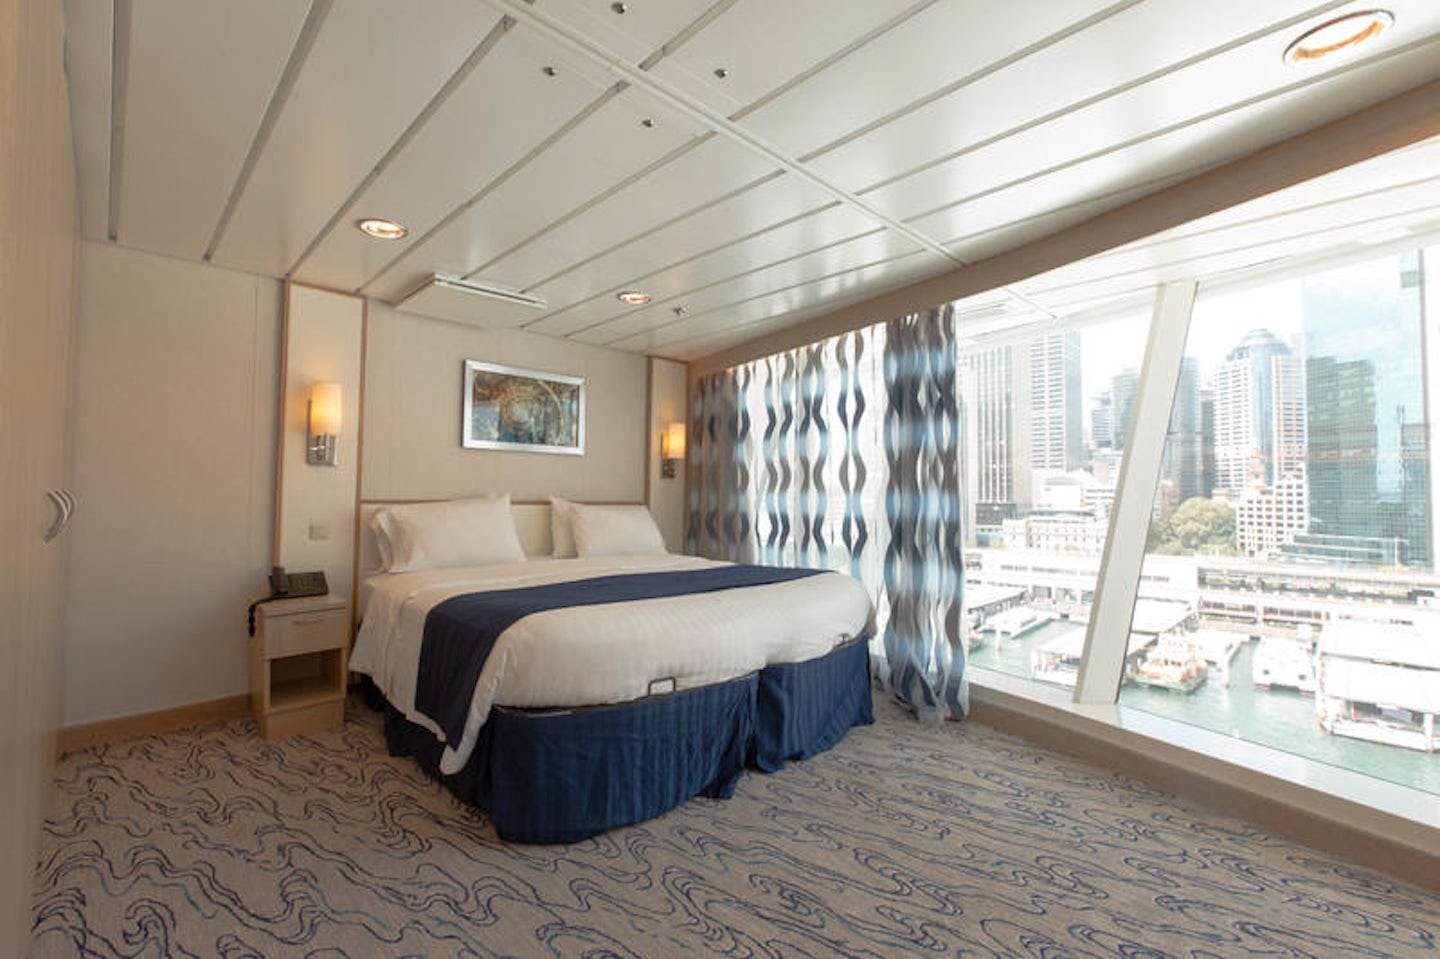 The Family Panoramic Oceanview Cabin on Voyager of the Seas